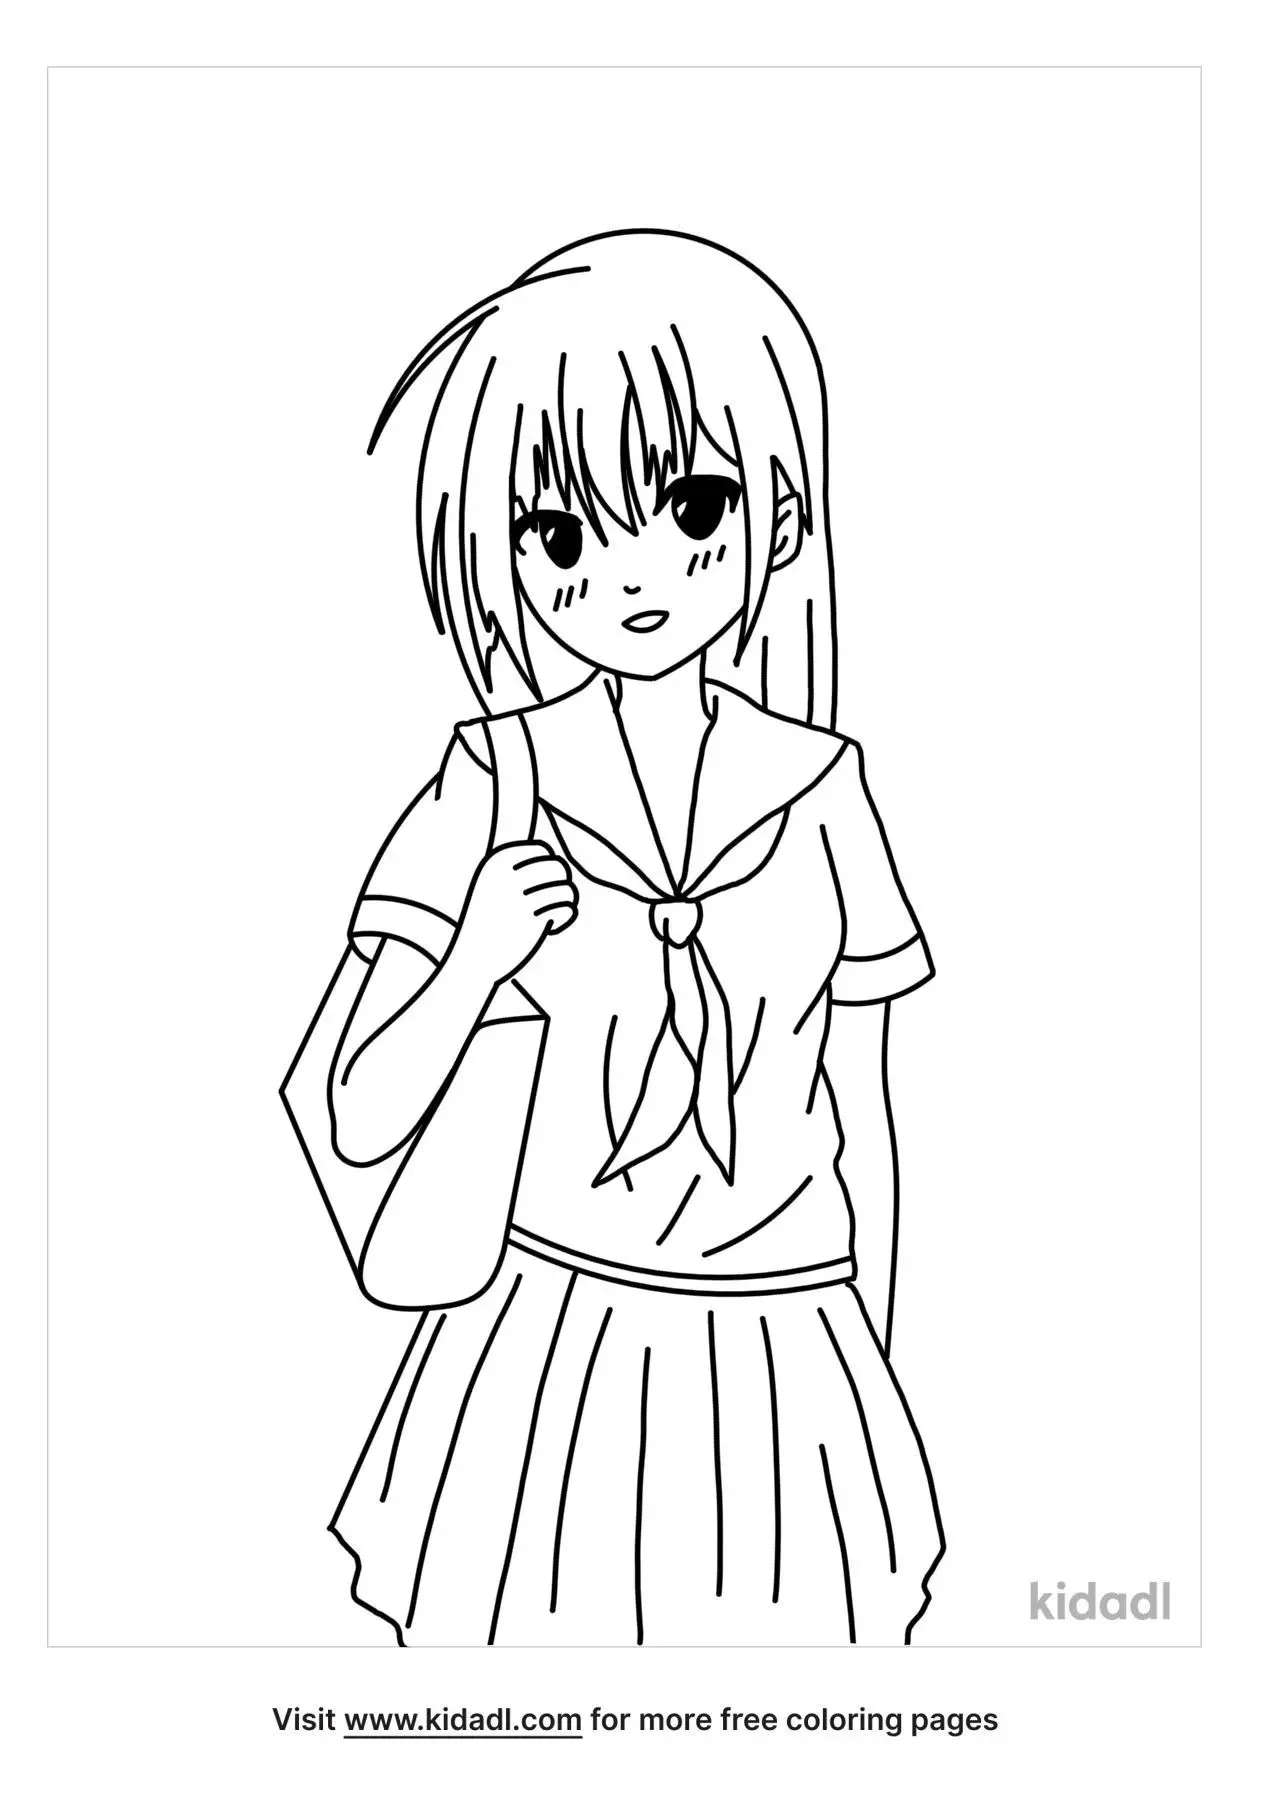 Sad anime girl  Woman coloring pages for Adults Print and Online